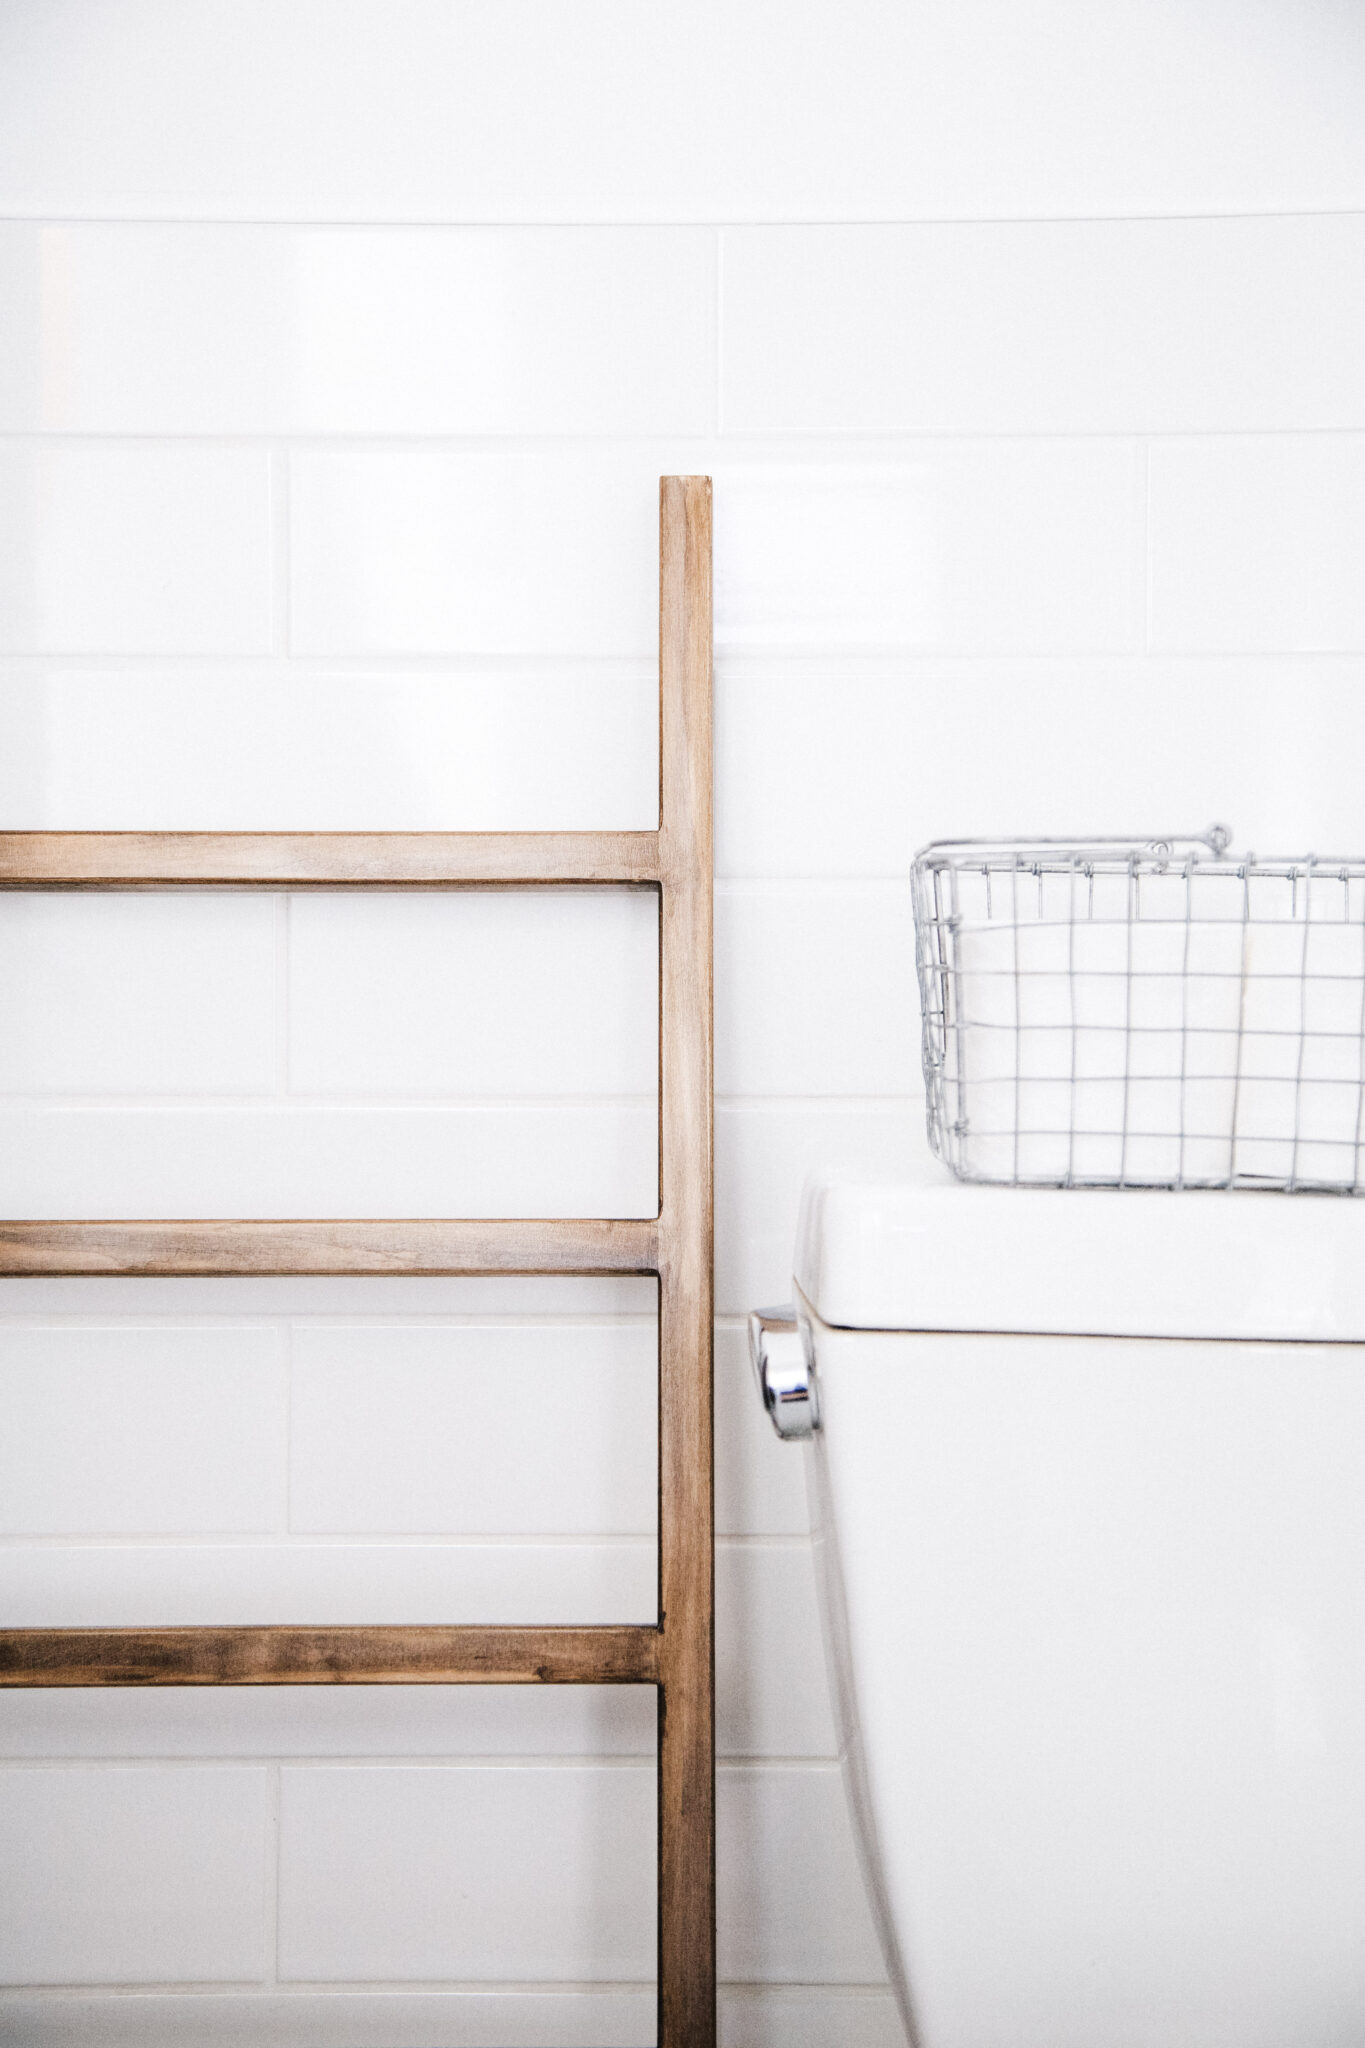 A towel ladder rests next to a toilet. This article covers tips for hiring a plumber.